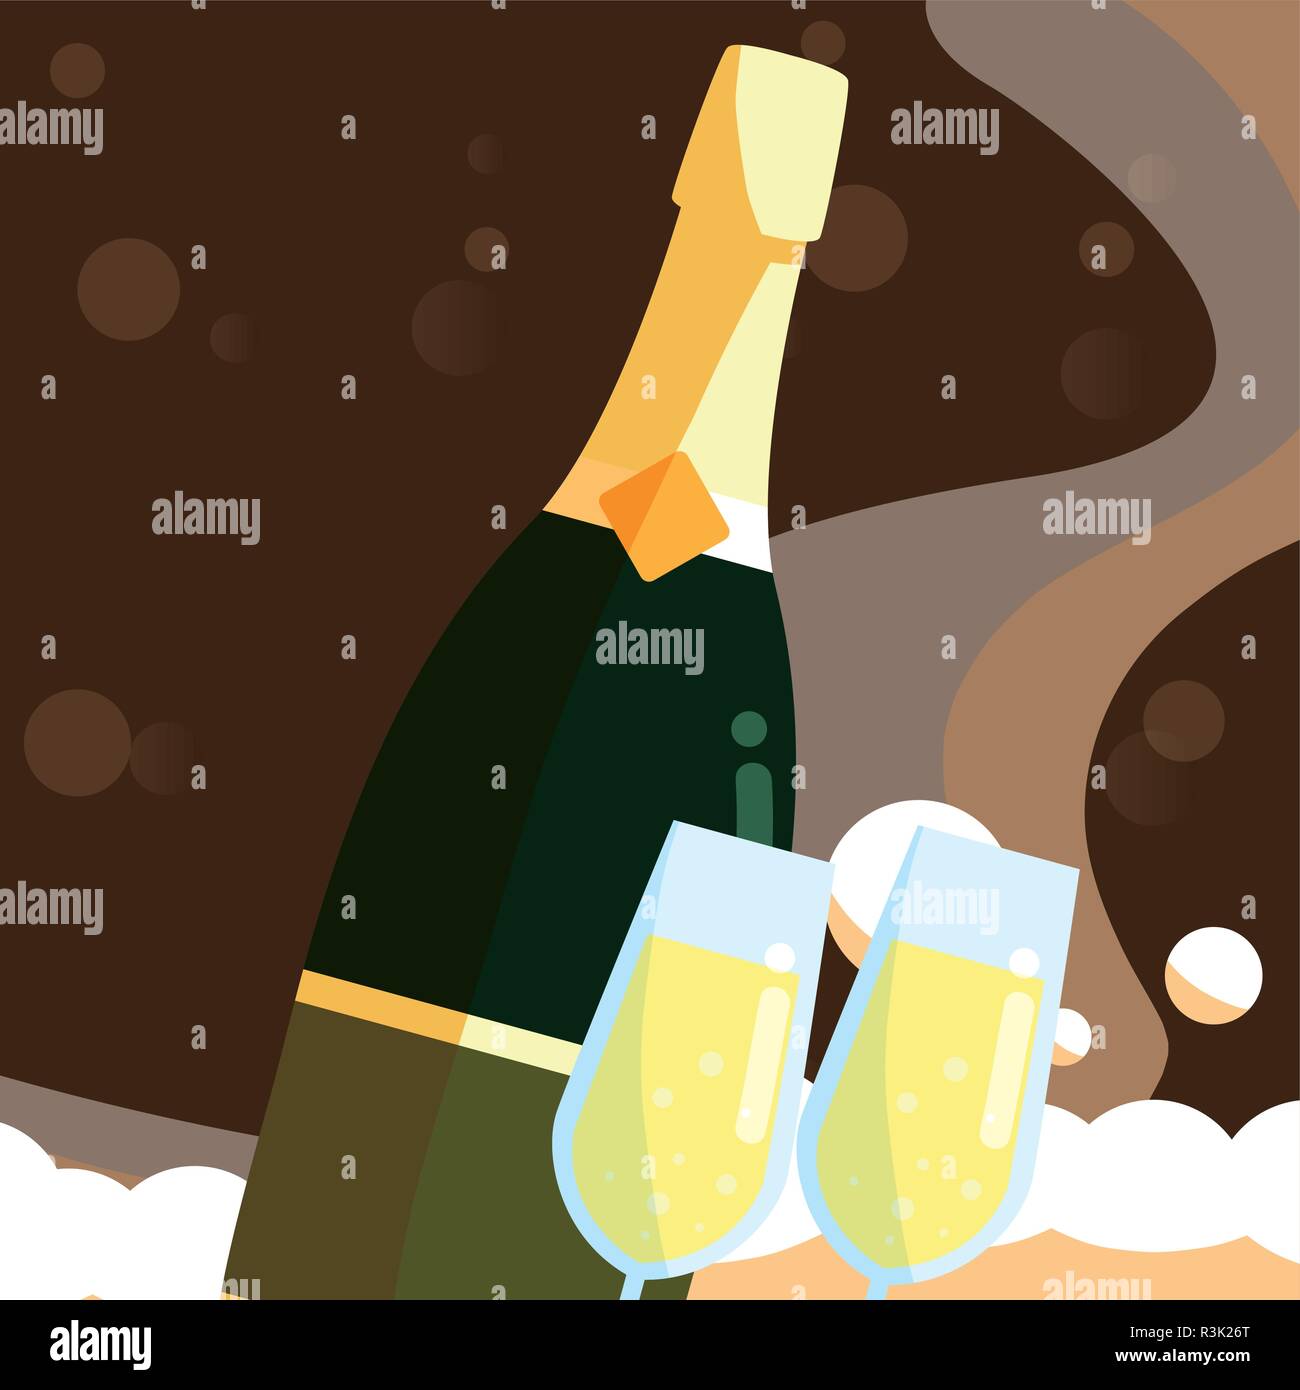 Champagne bottle and glass icon over brown  background, vector illustration Stock Vector